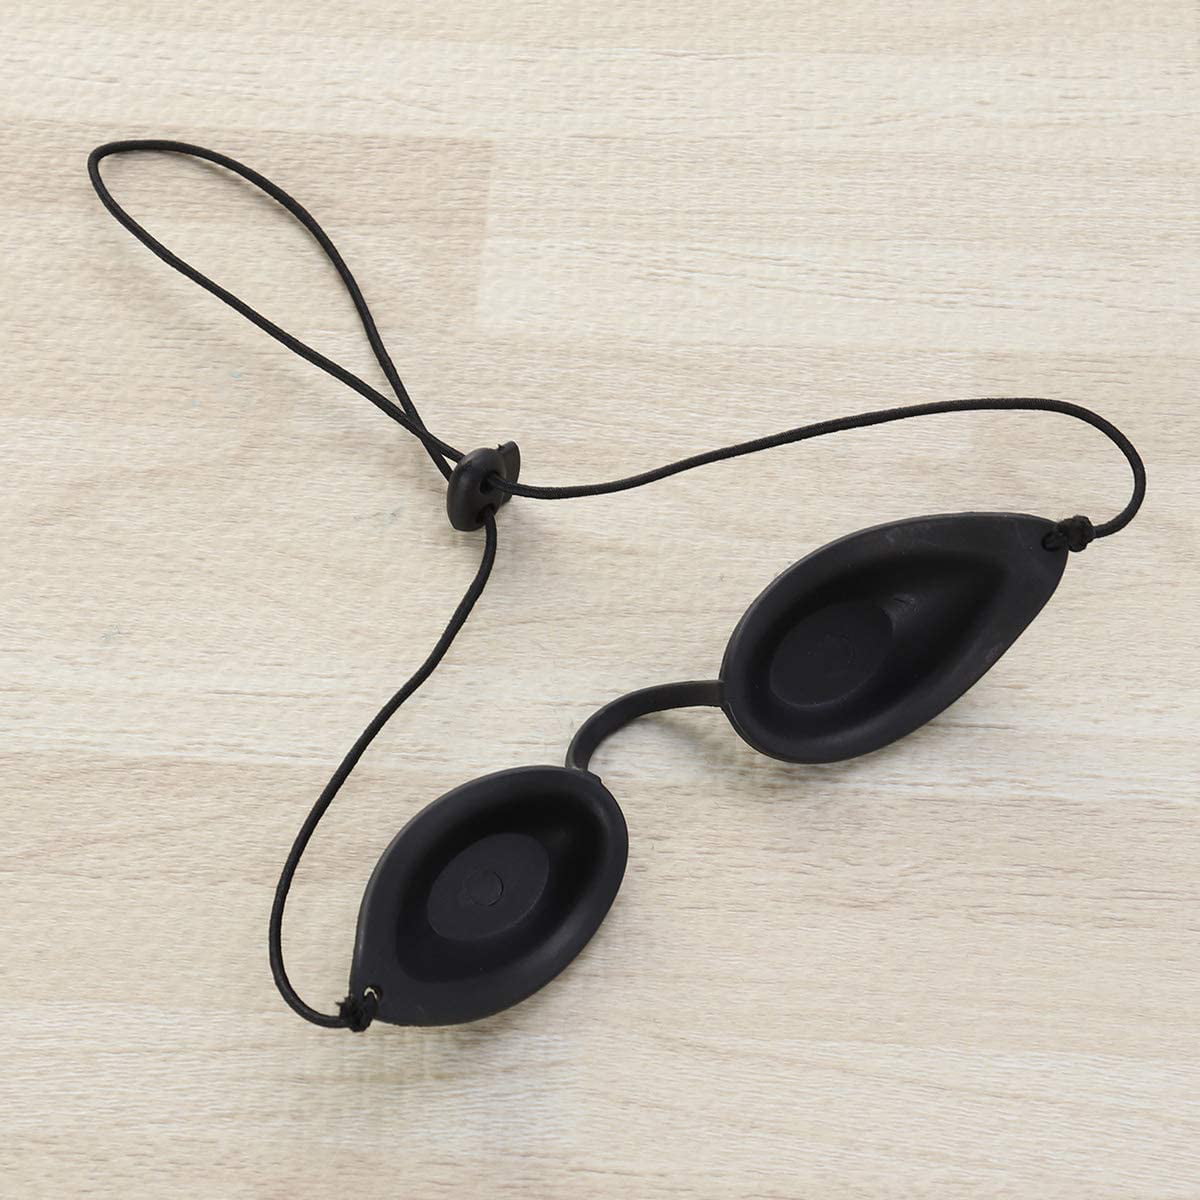 HEALILY Safety Goggles Eye Patch Rosso Blu Light Eye Protect Eyepatch per i pazienti in IPL UV LED Light Therapy Soft nero 